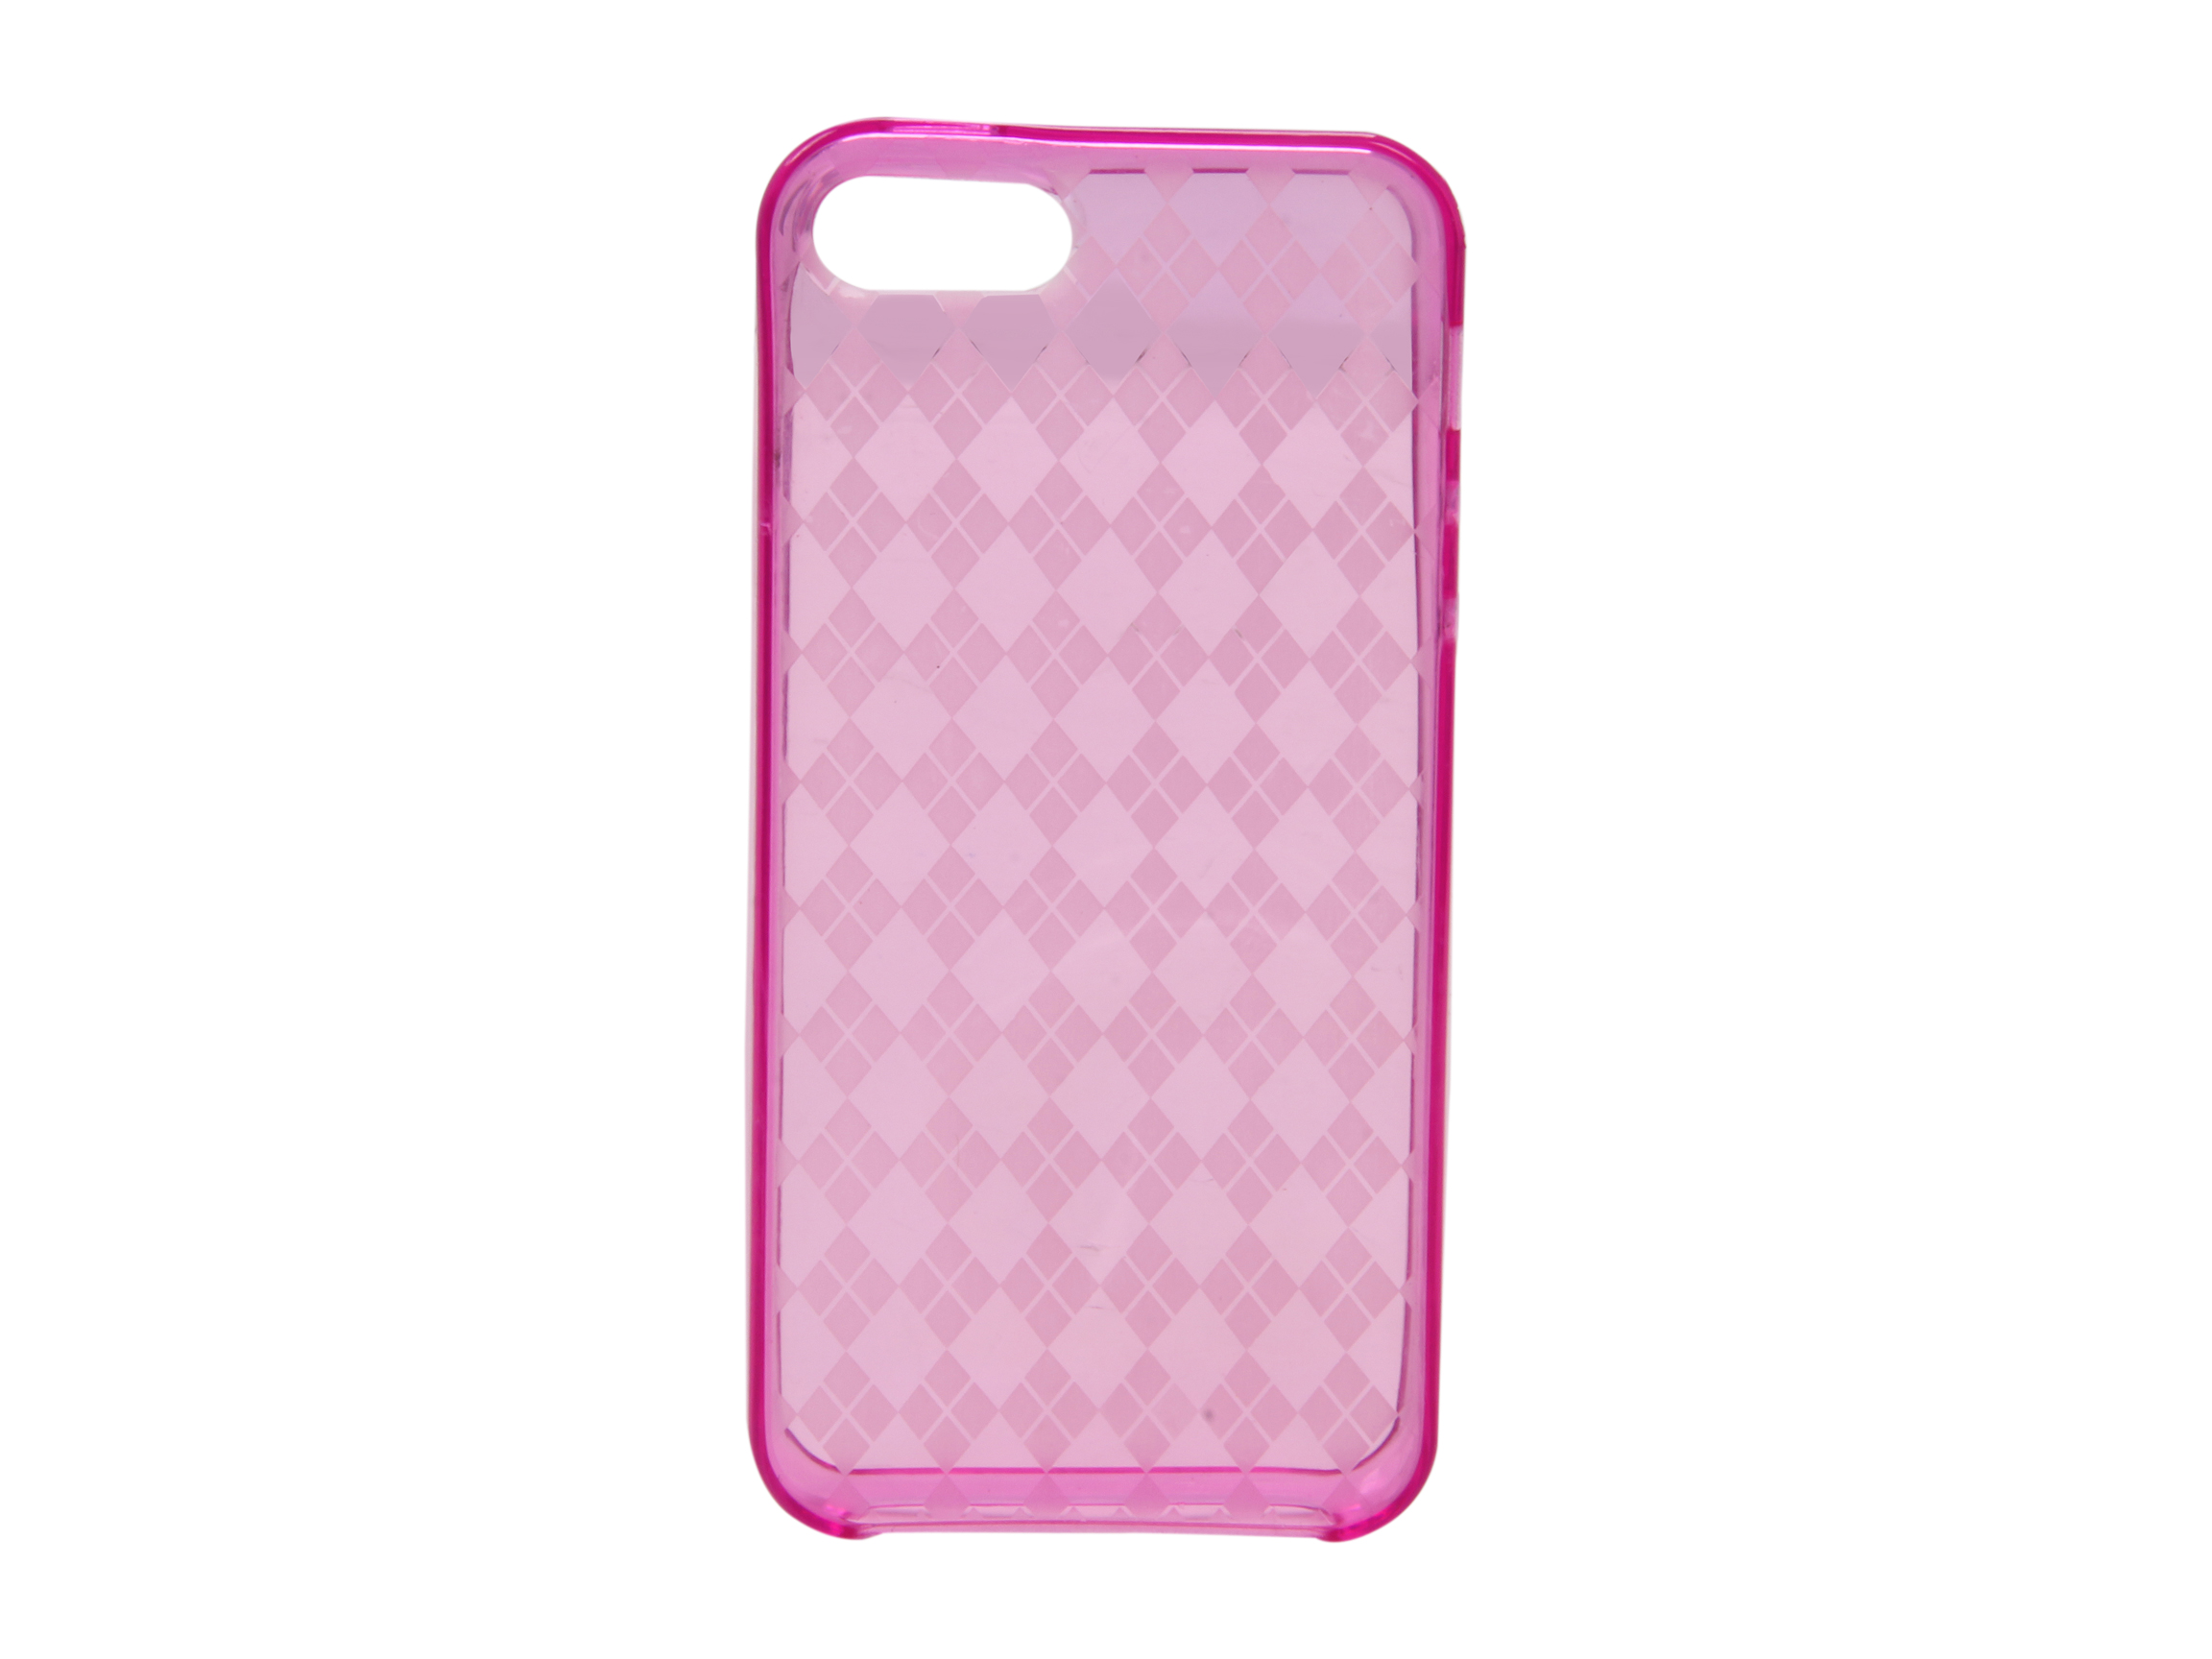 AMZER Luxe Argyle Hot Pink Solid High Gloss TPU Soft Gel Skin Fit Case For iPhone 5 AMZ94511